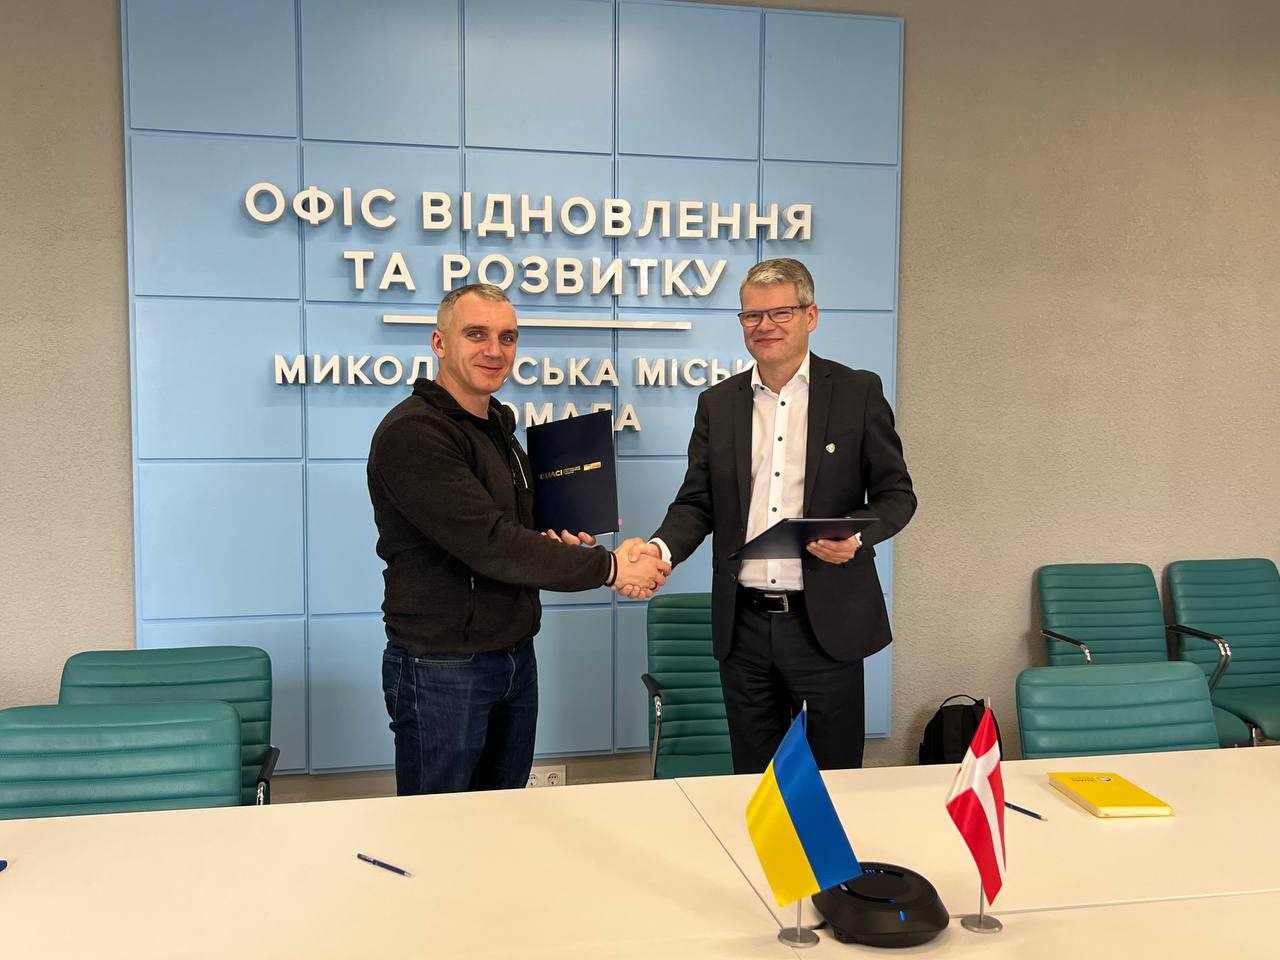 EUACI Continues Cooperation with Mykolaiv